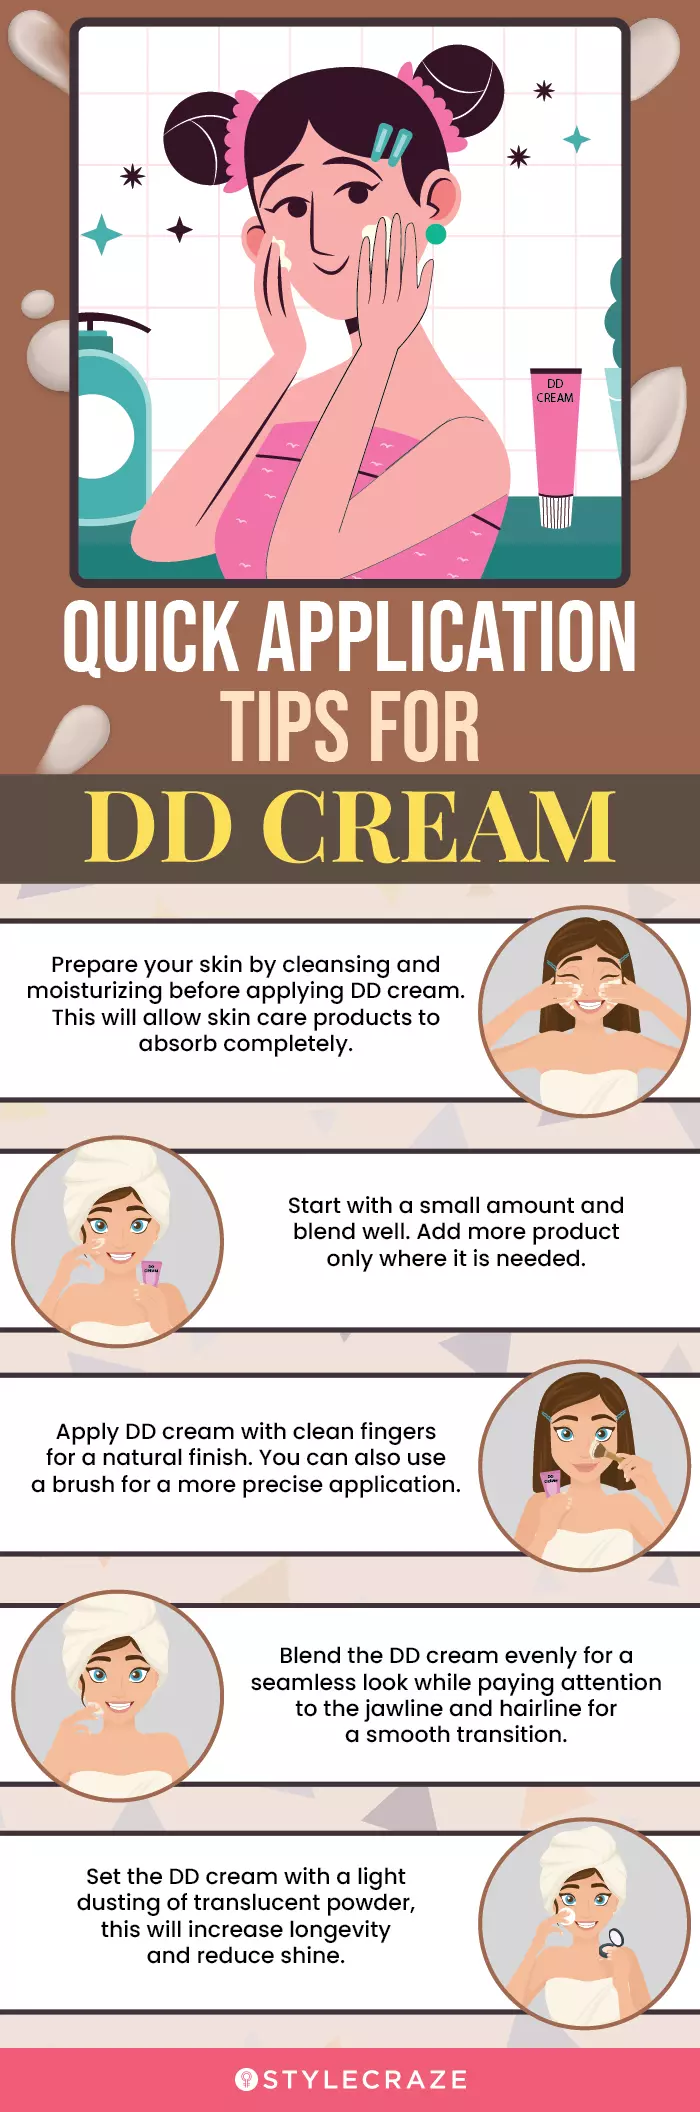 Quick Application Tips For DD Cream (infographic)